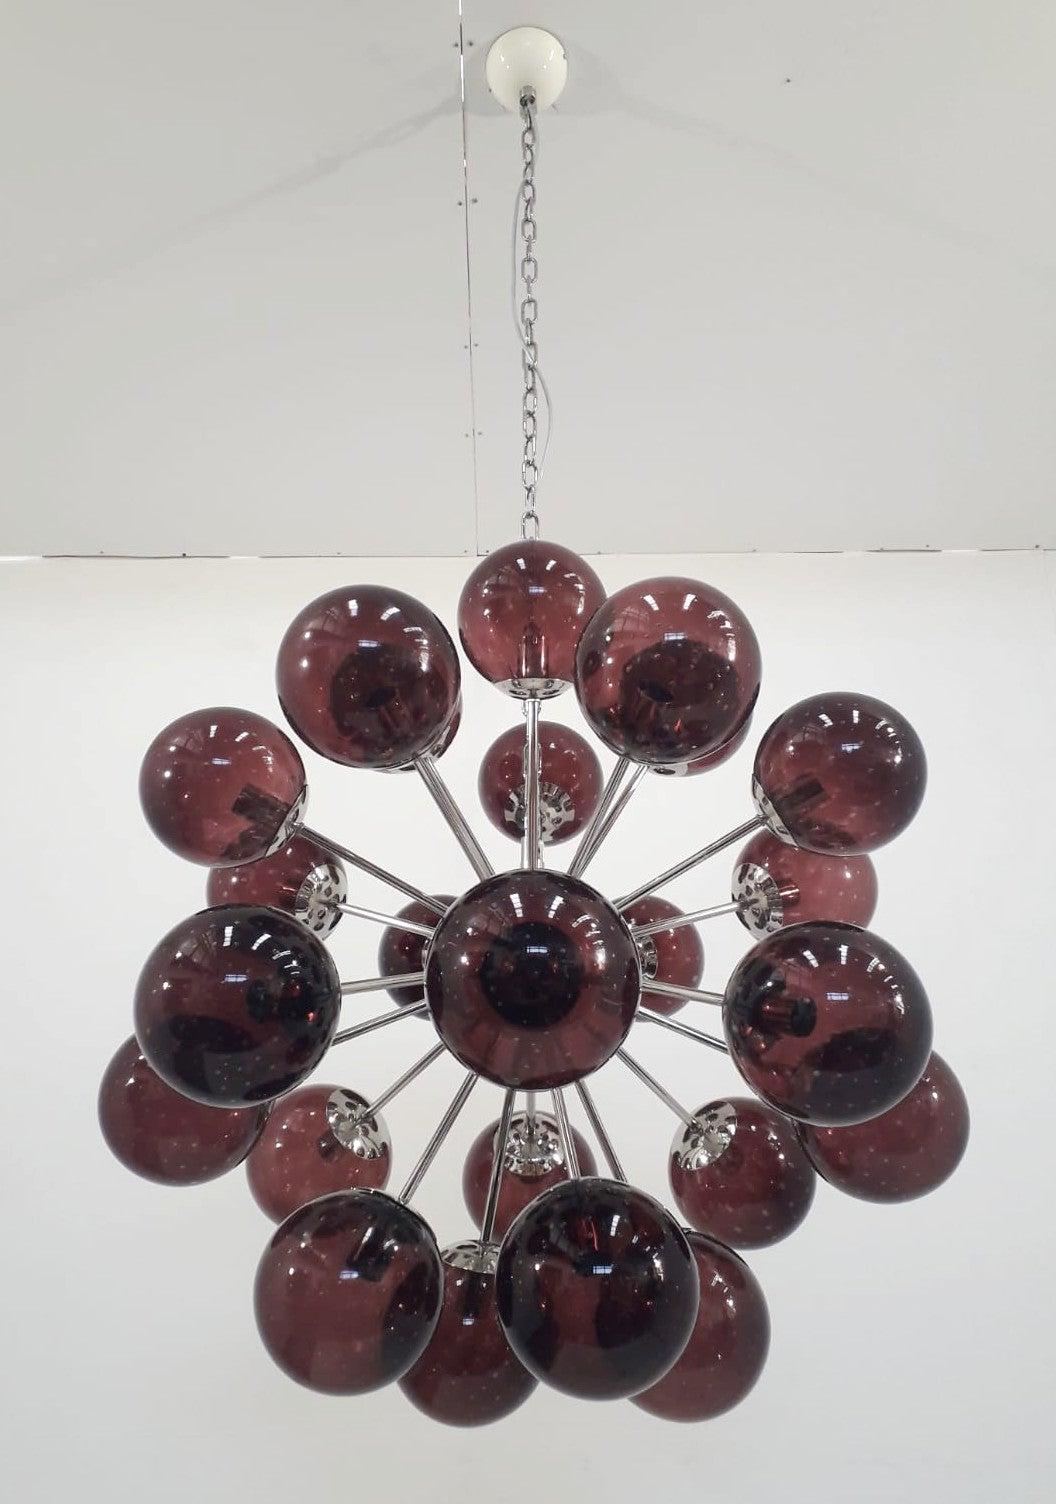 Italian sputnik chandelier with 24 Murano glass globes mounted on metal frame in polished nickel finish / Designed by Fabio Bergomi for Fabio Ltd / Made in Italy
24 lights / E12 or E14 type / max 40W each
Measures: Diameter 32 inches / Height 32